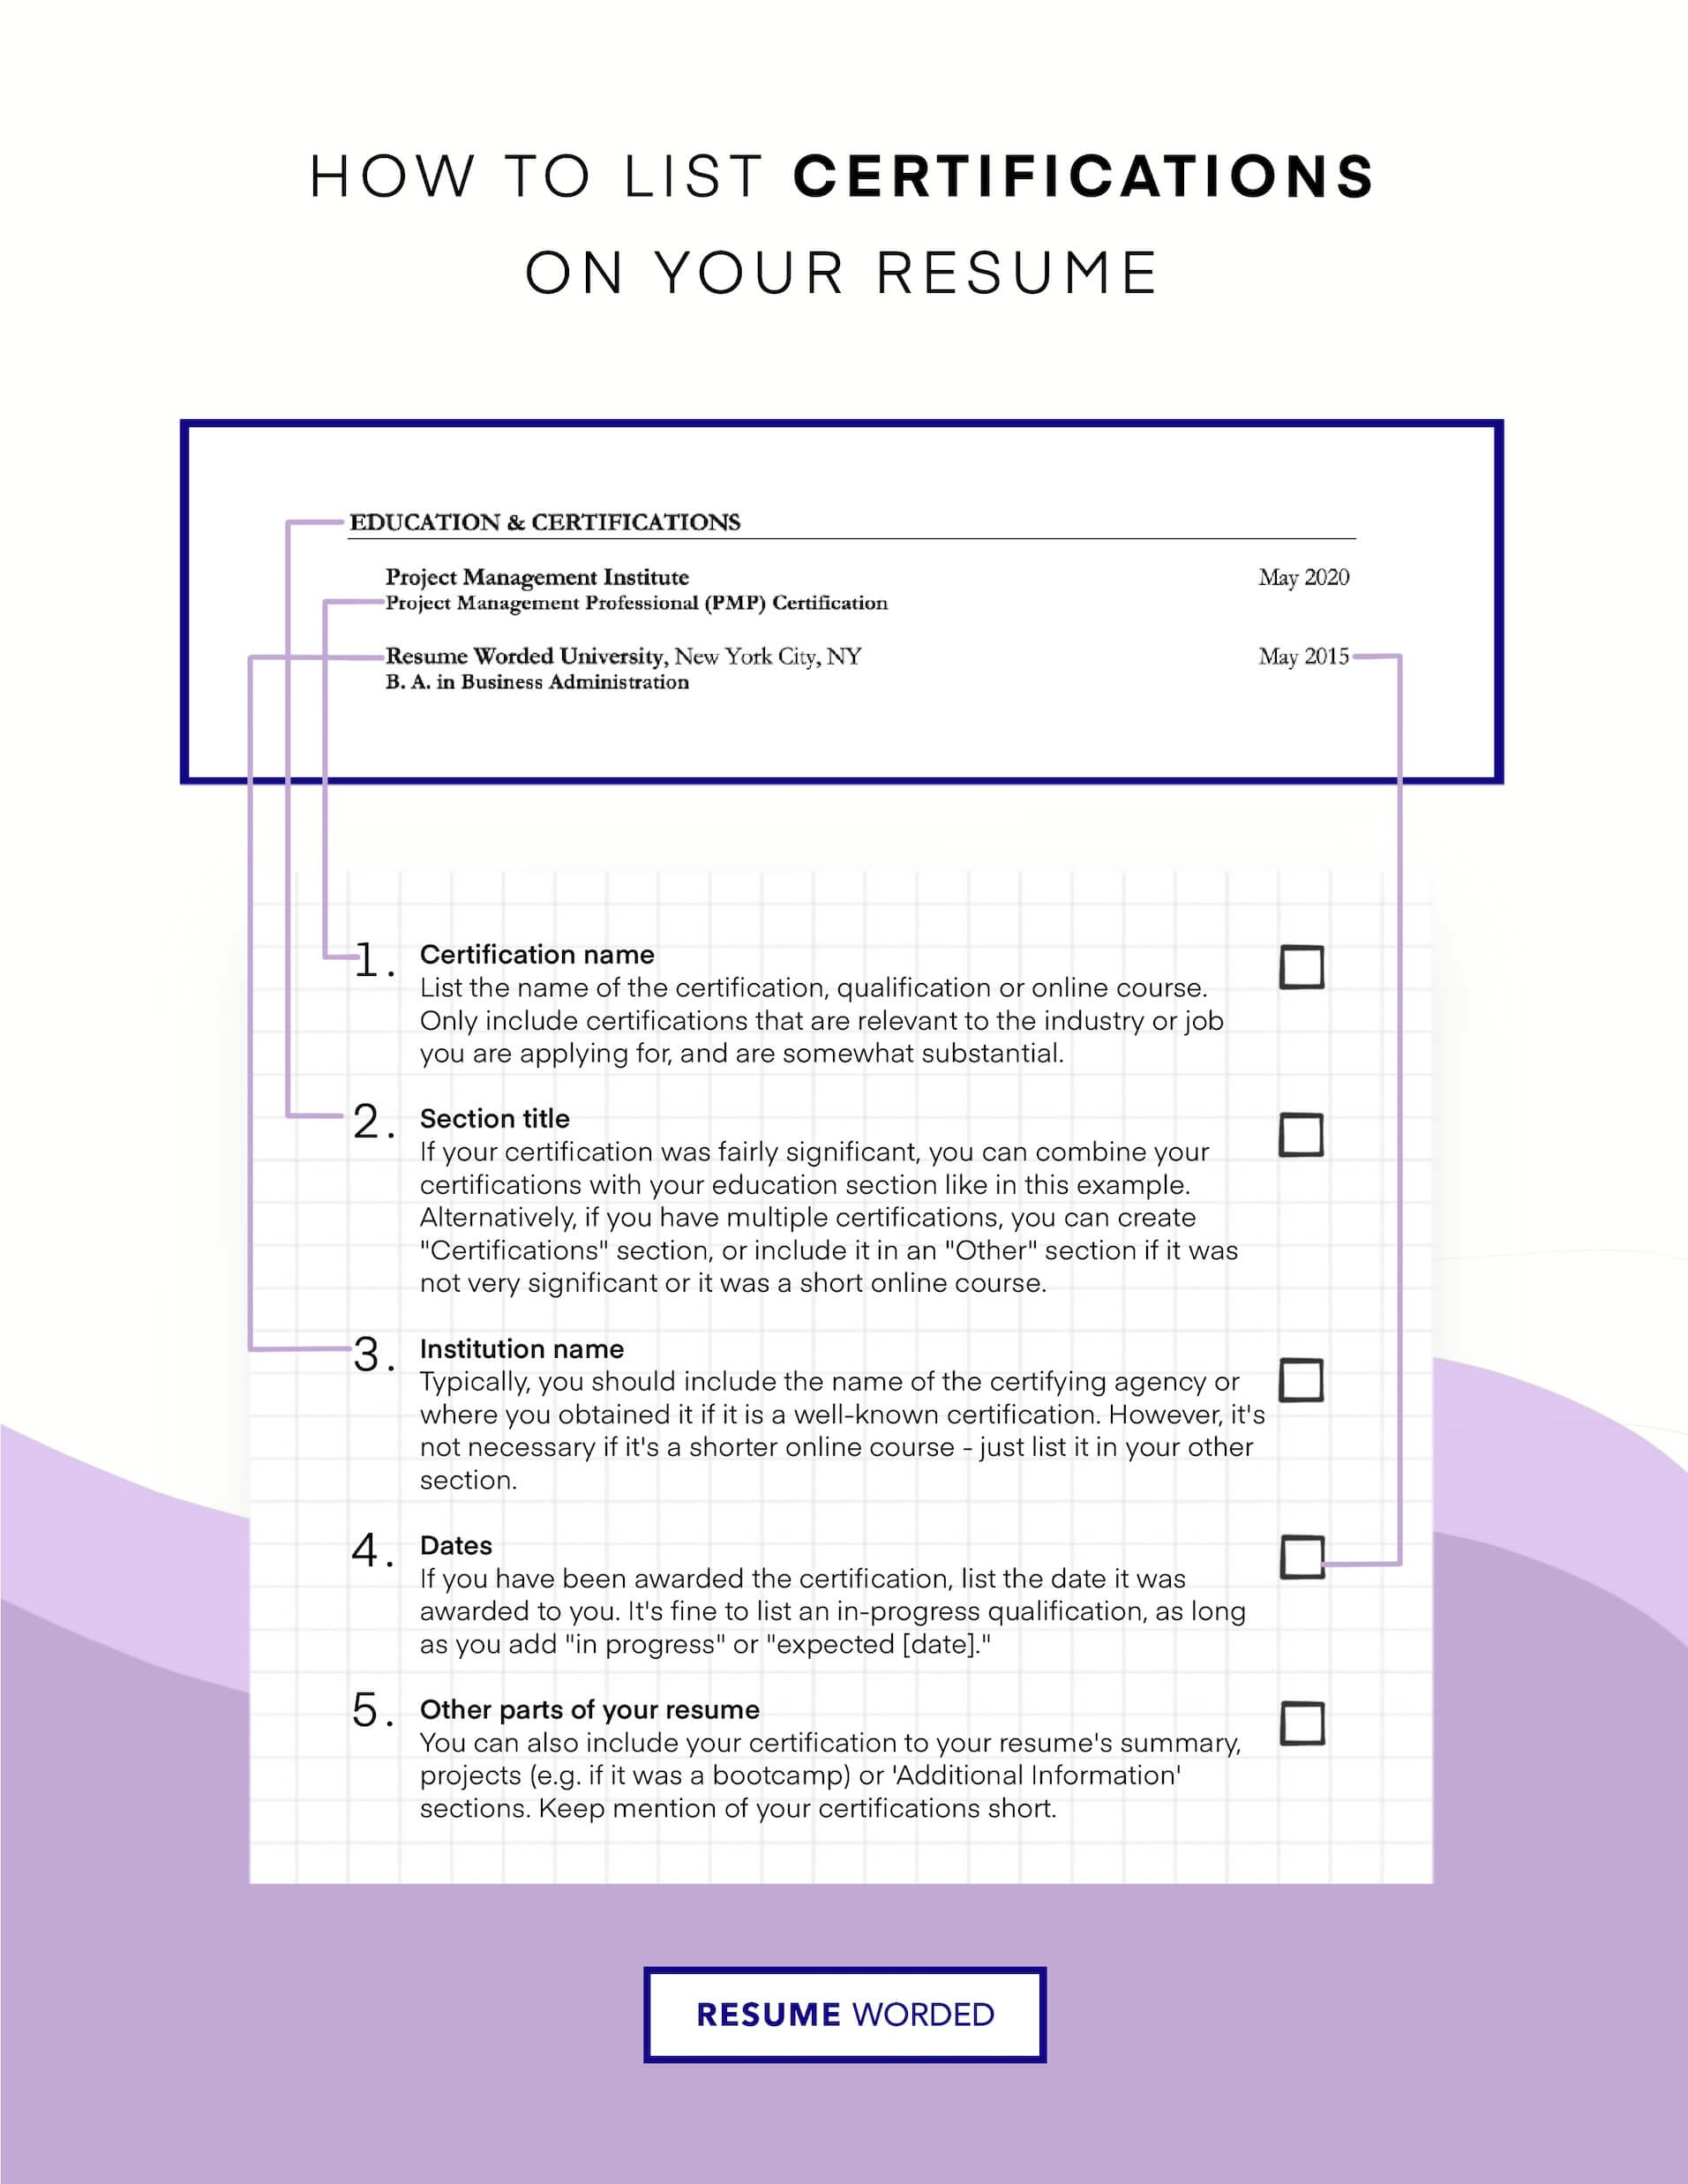 Obtain certifications to strengthen your resume - Entry Level Administrative Assistant Resume